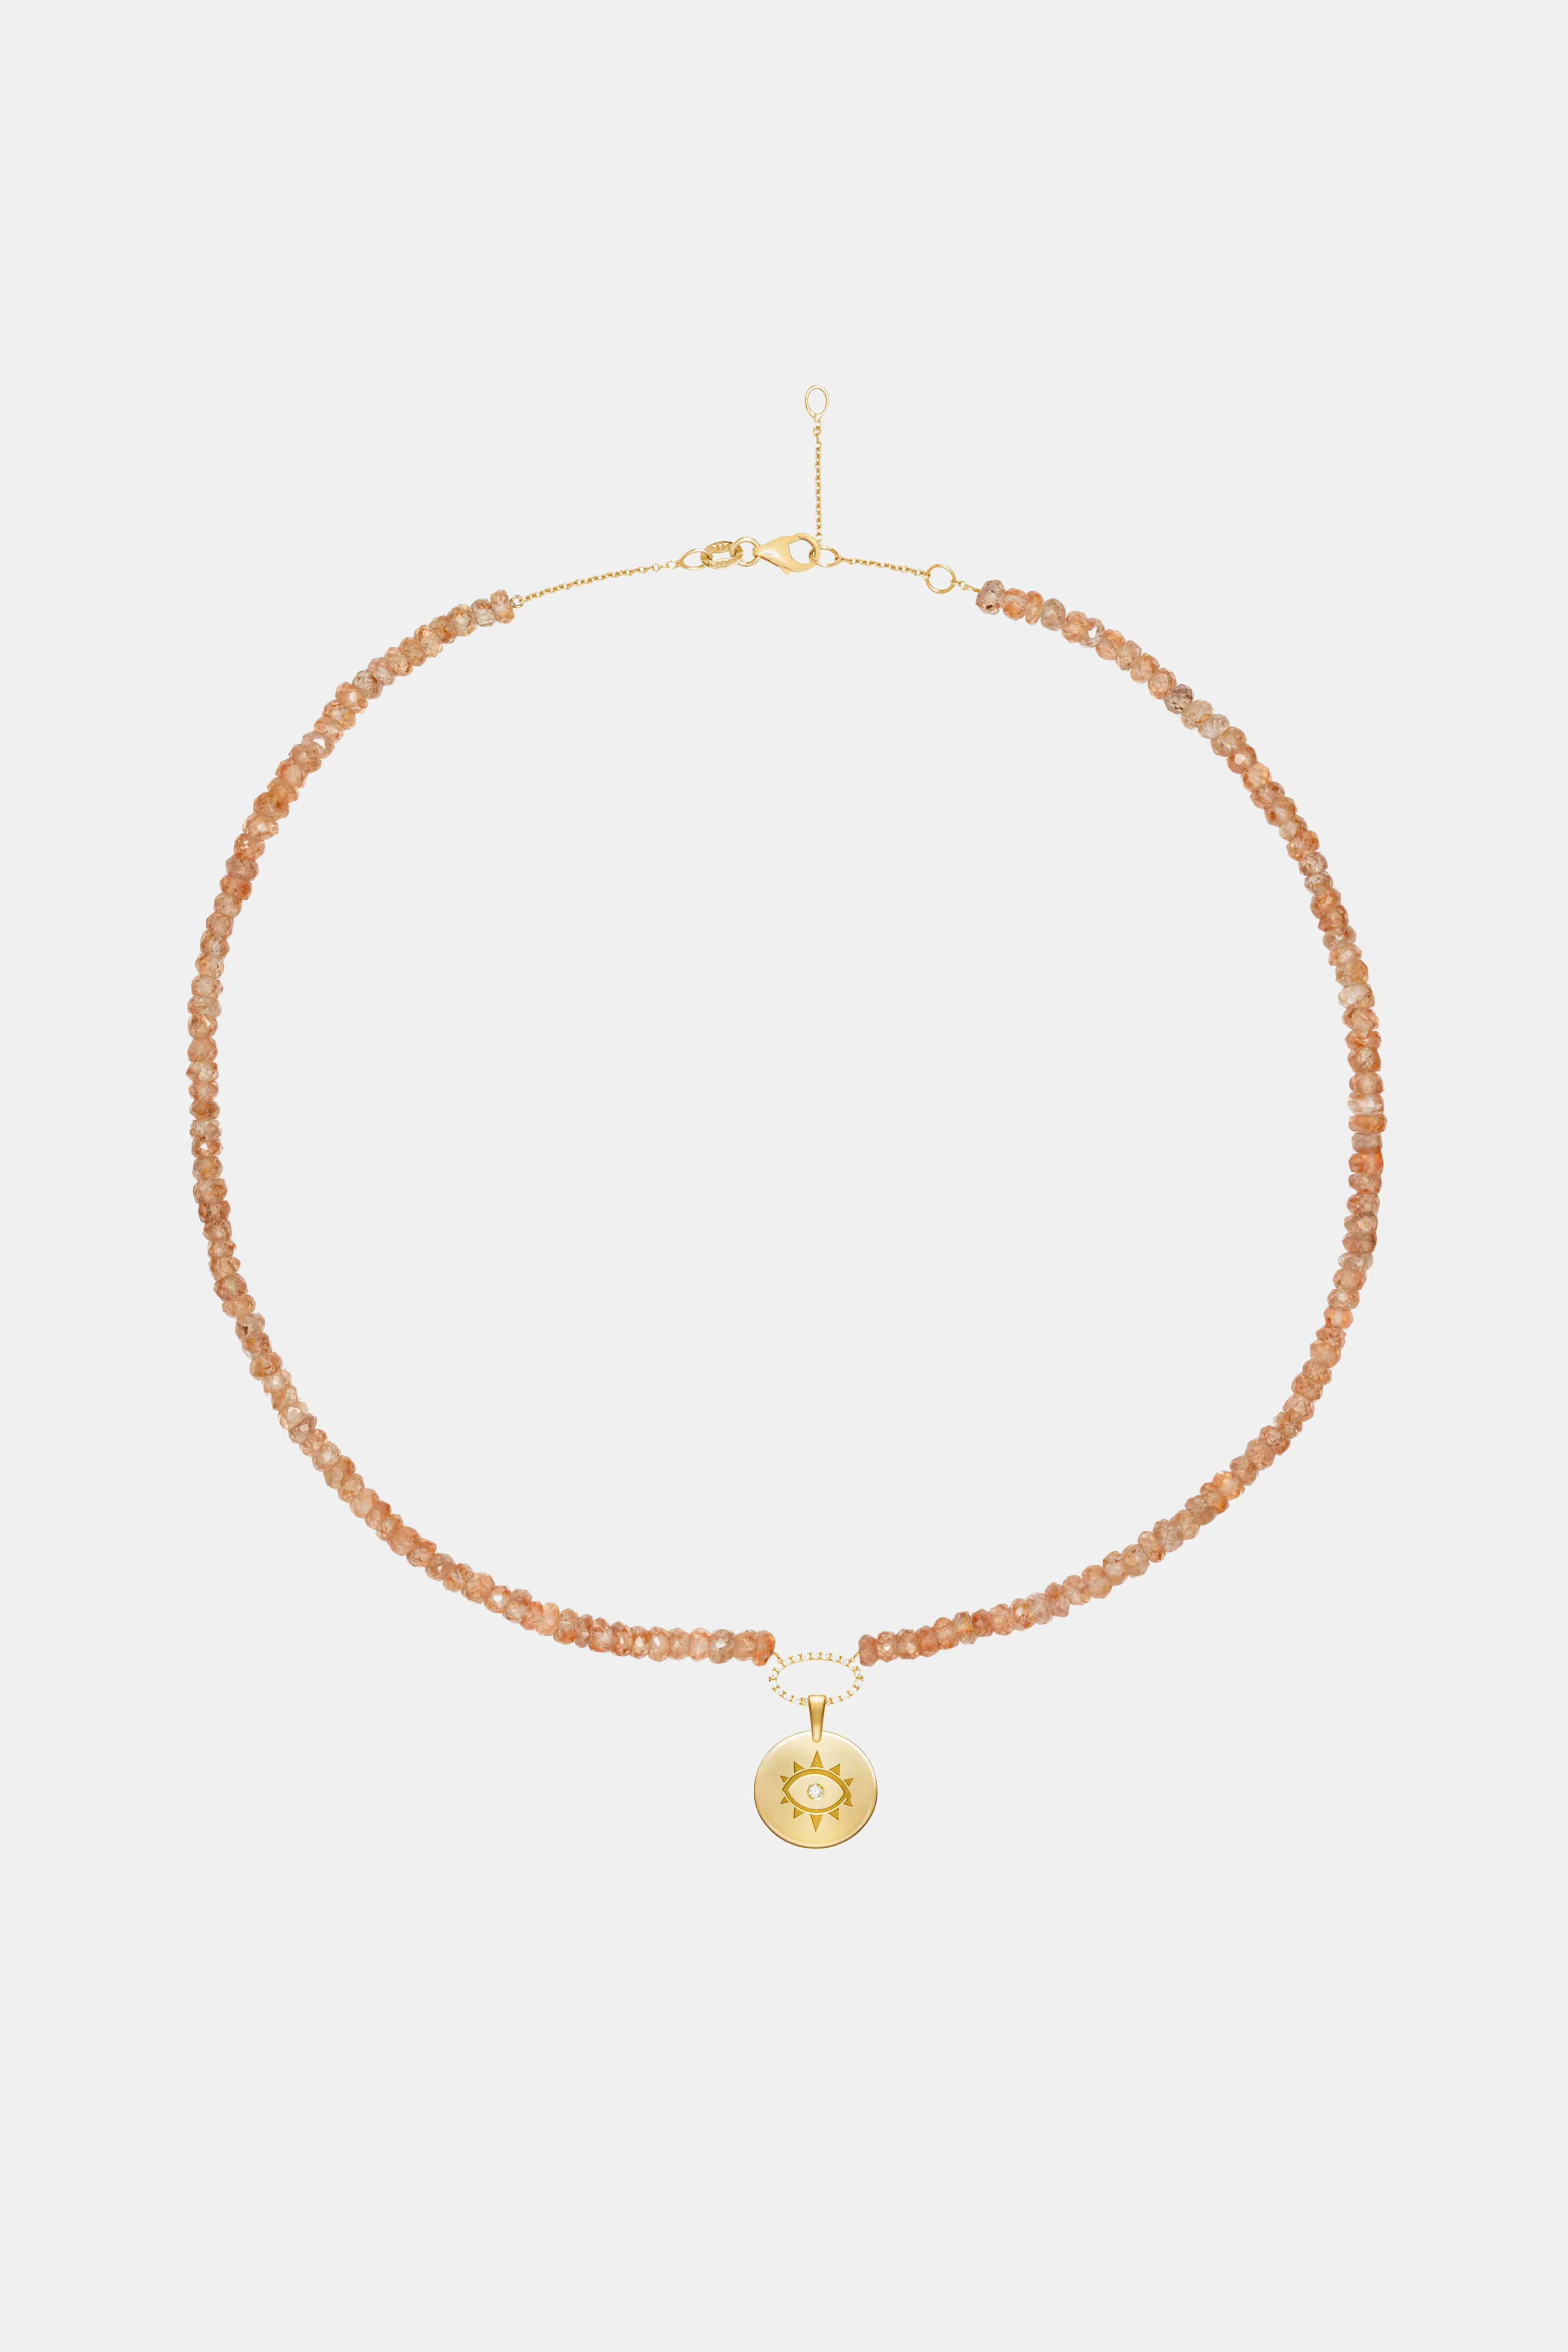 Zircon Apricot Beaded Necklace With Coin Evil Eye Pendant